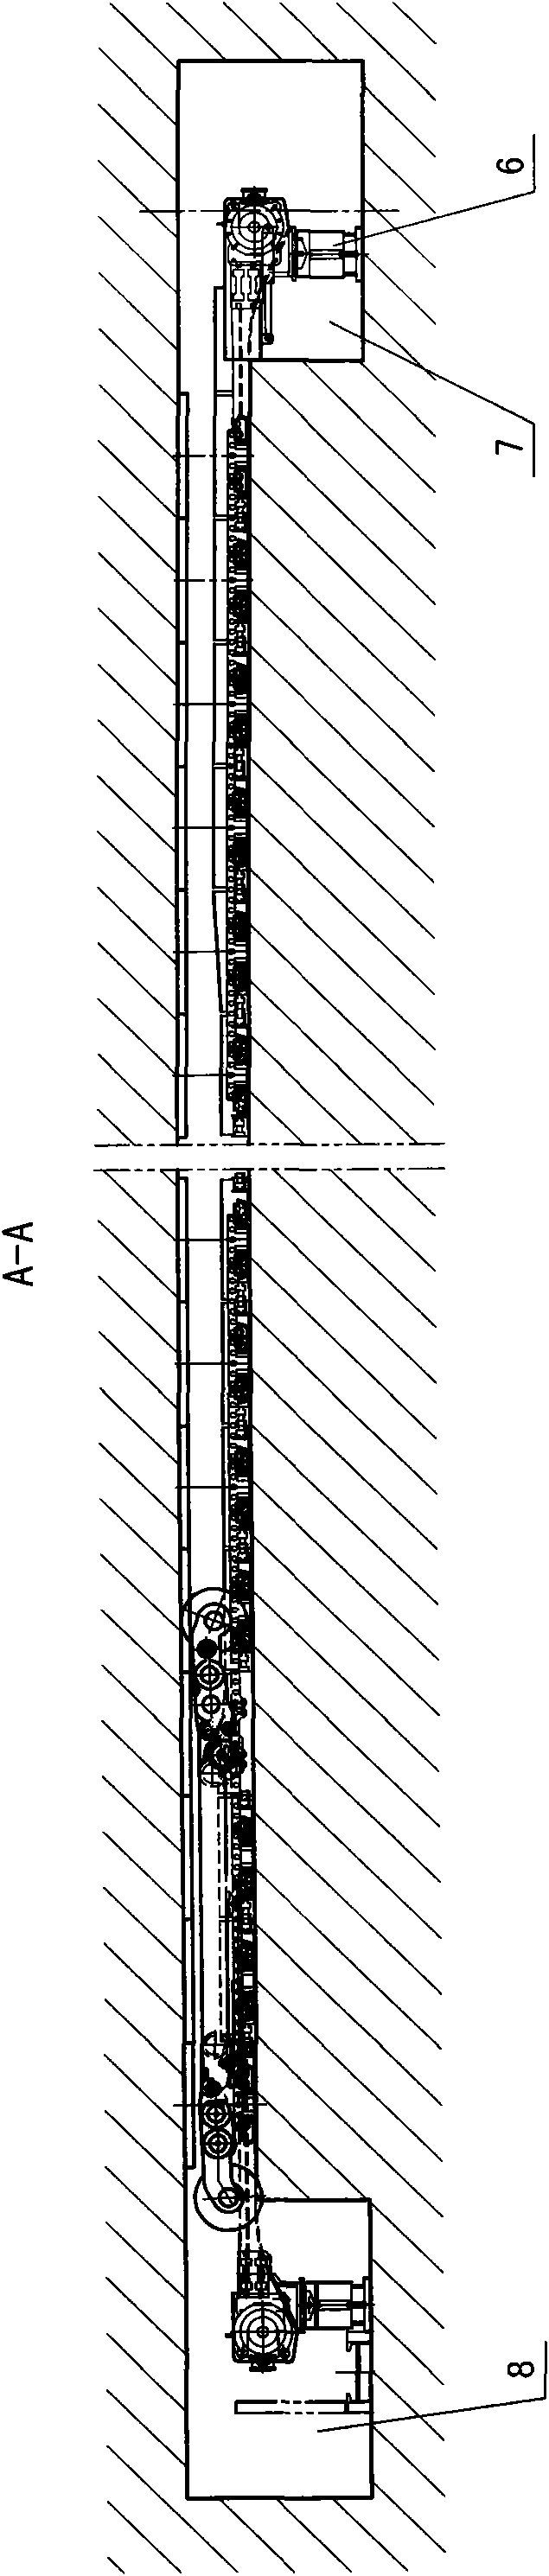 Process for stoping low coal seam containing ferric sulfide concretions and hard parting bands and hydraulic support thereof for fully mechanized mining